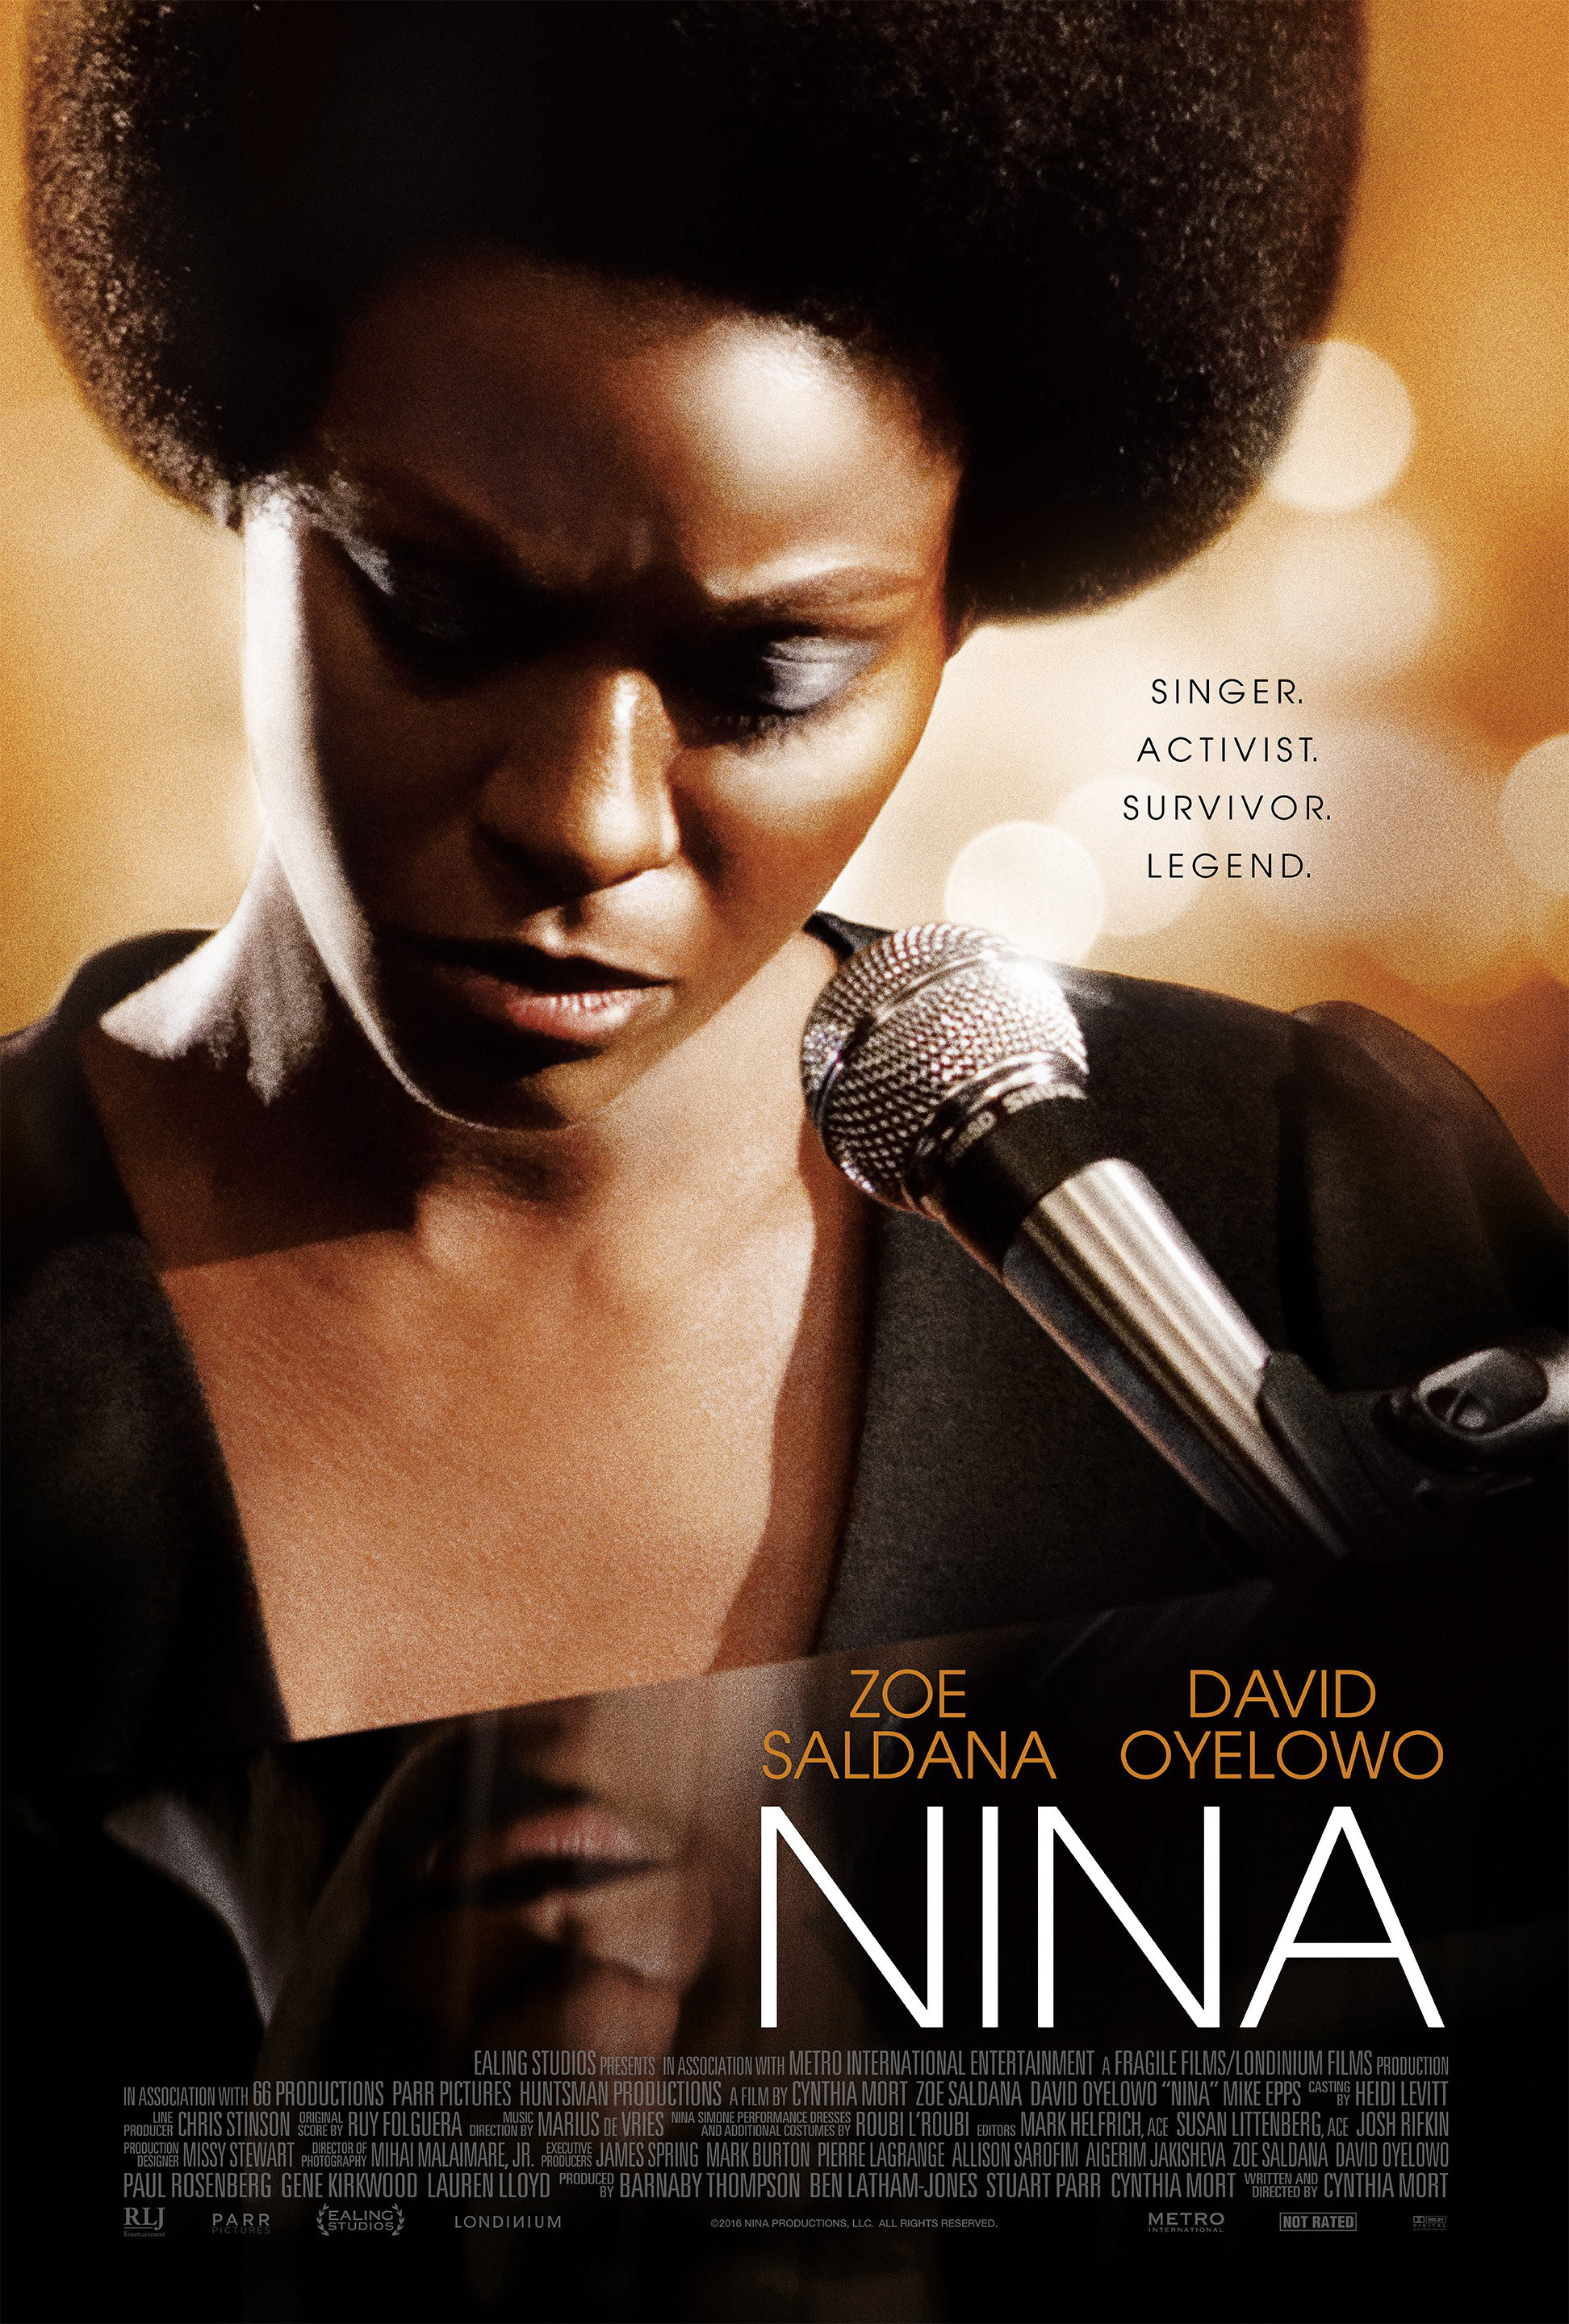 the poster for the movie NIna